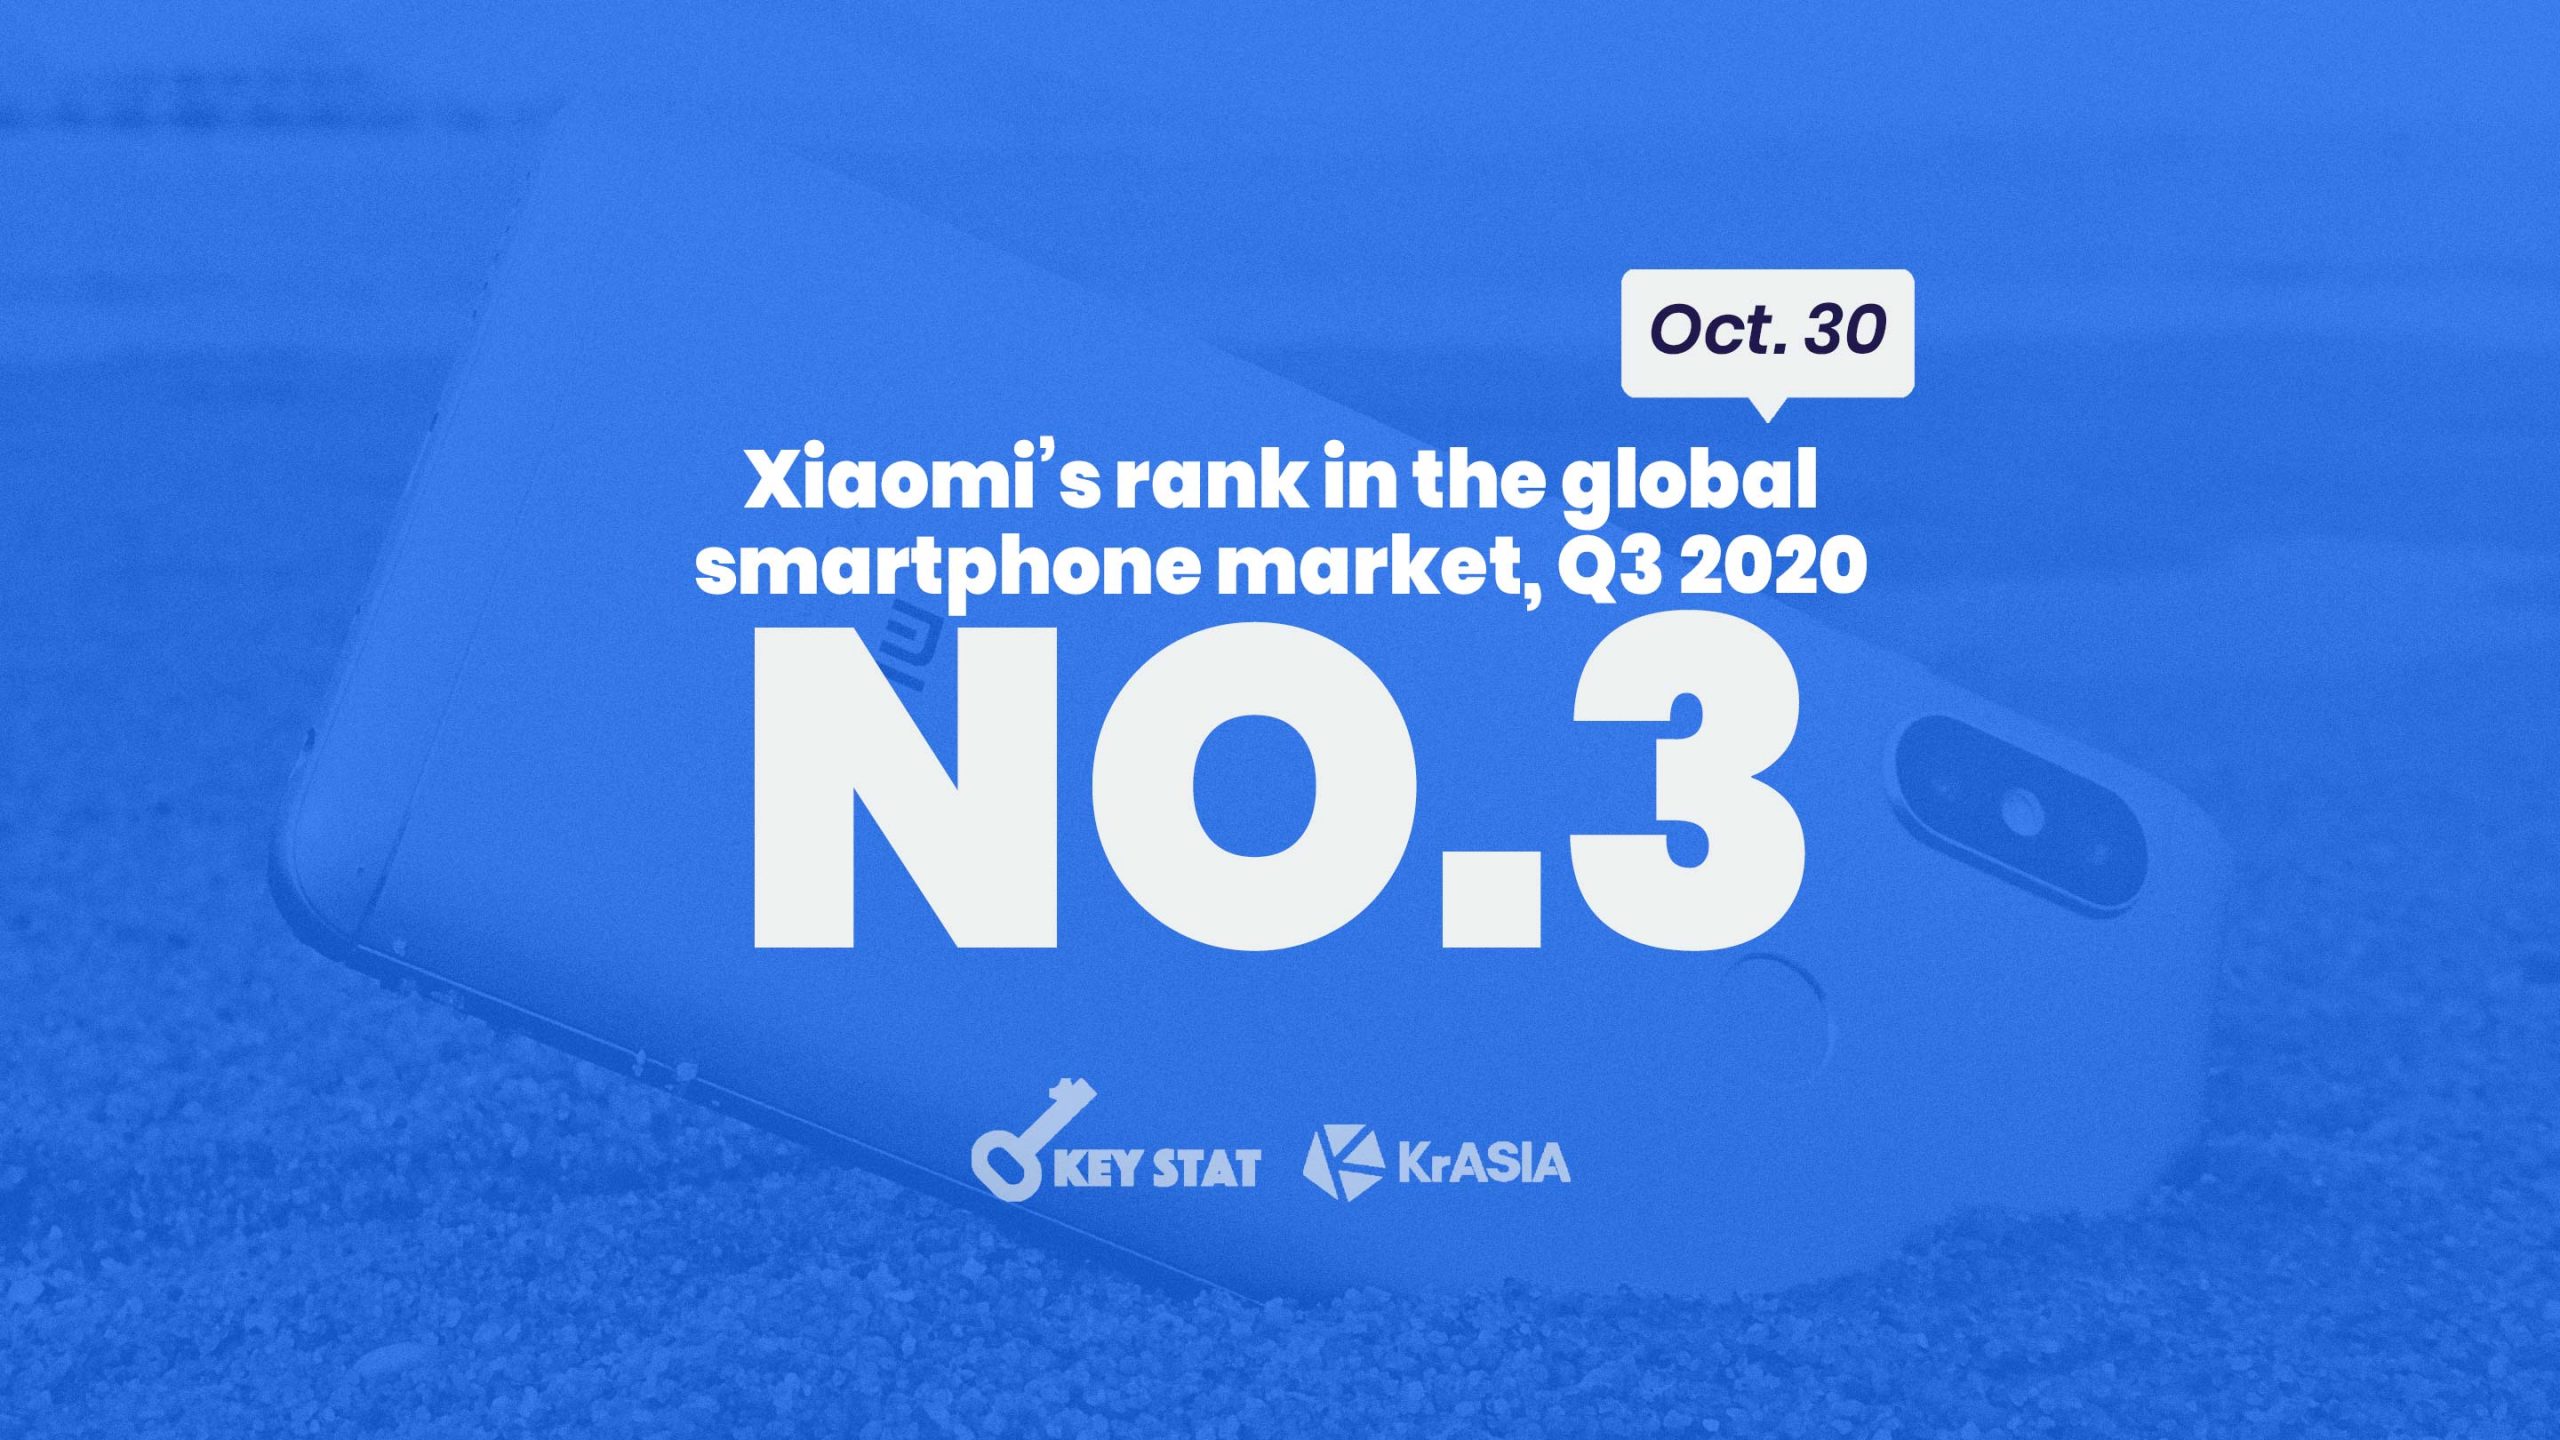 KEY STAT | Xiaomi reclaims third place in global smartphone market after 6 years